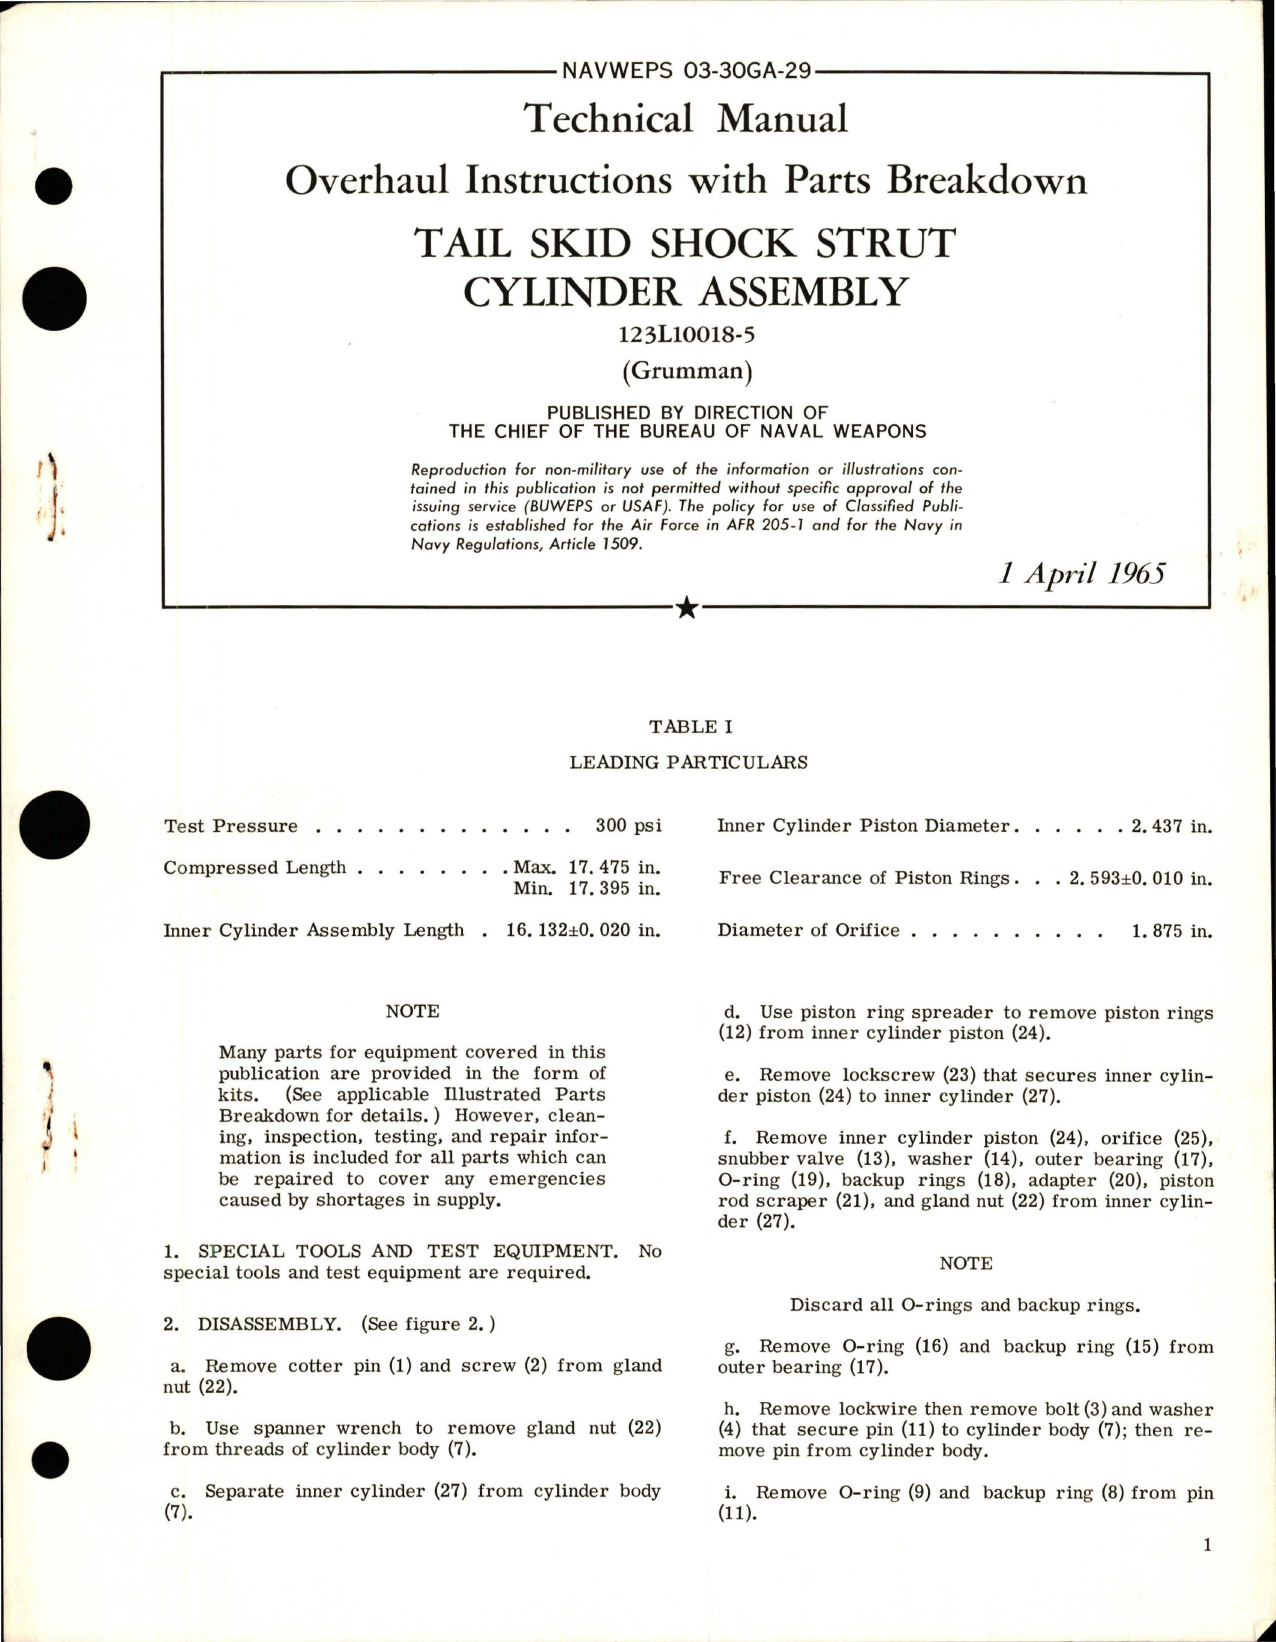 Sample page 1 from AirCorps Library document: Overhaul Instructions with Parts Breakdown for Tail Skid Shock Strut Cylinder Assembly - 123L10018-5